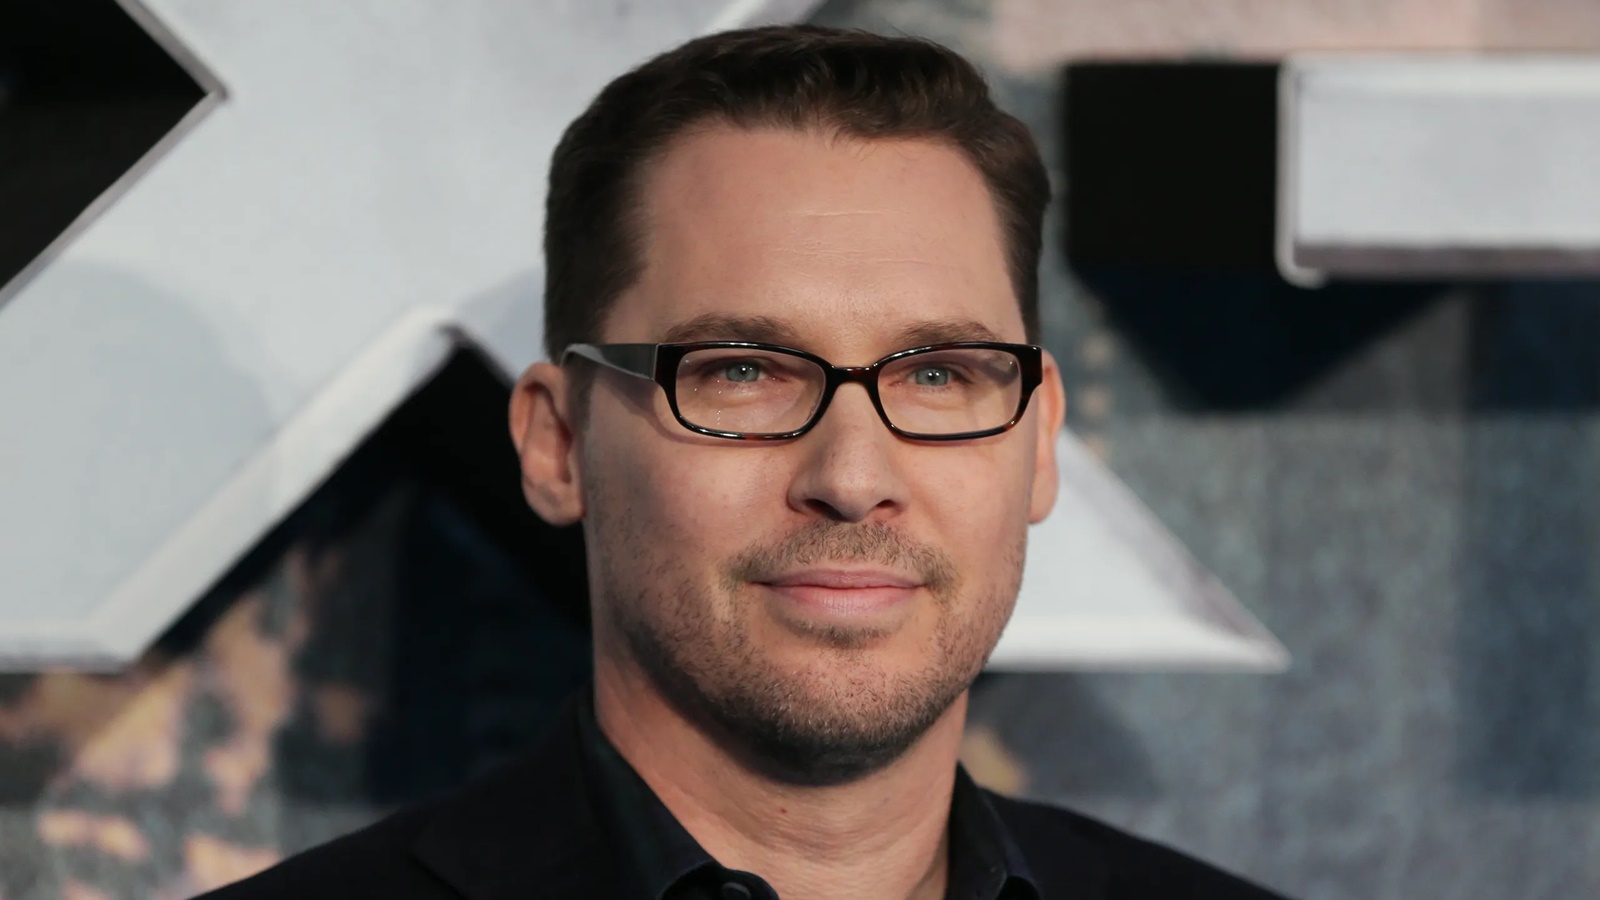 Bryan Singer is working on a documentary to address allegations of violence and harassment, and is working on 3 films